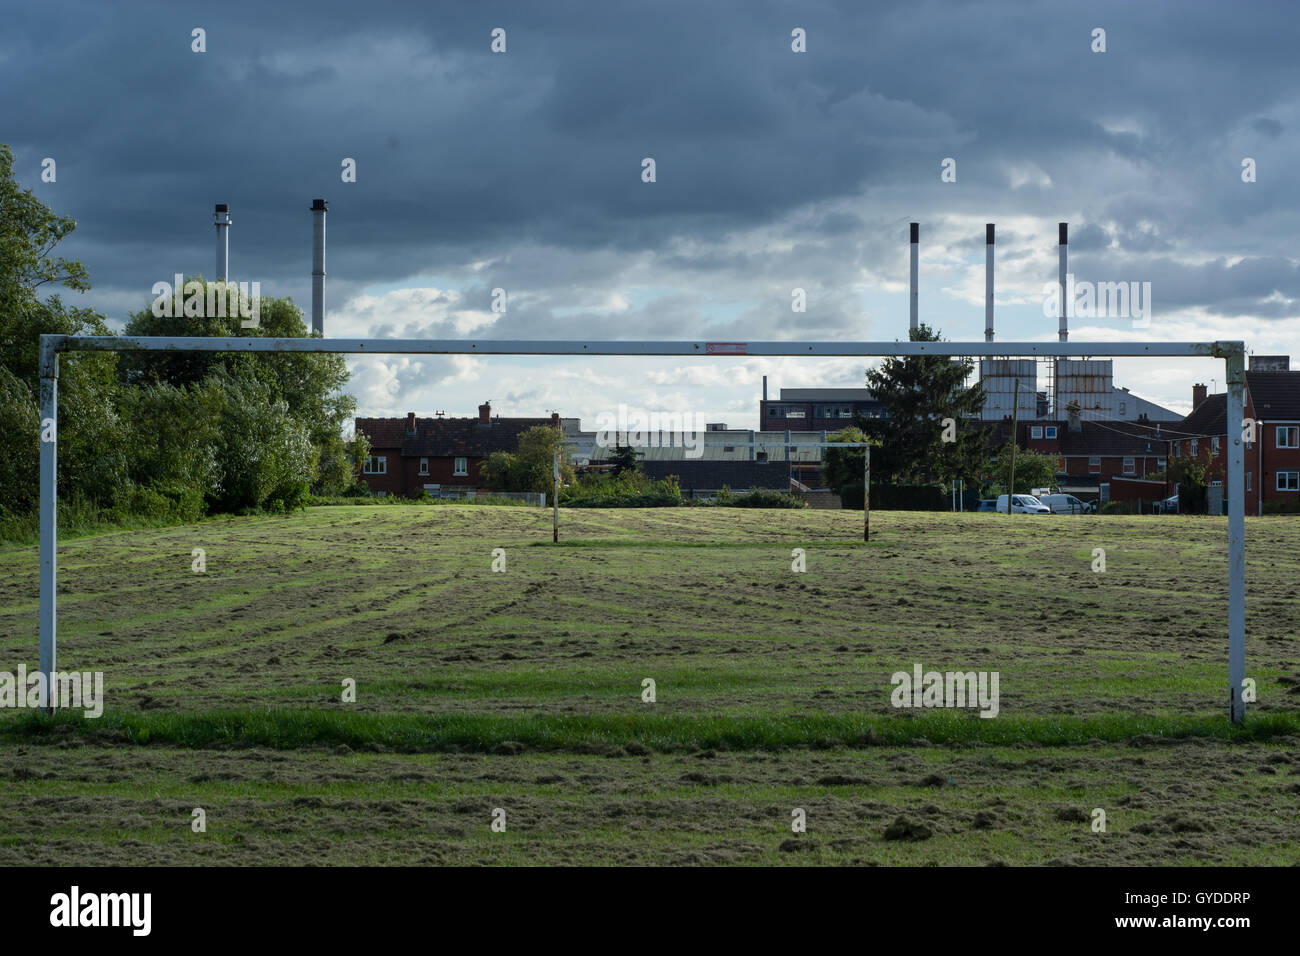 Playing field, goalpost and chimneys in MelkshaIndustrial scene with tyre factory in town in Wiltshire, England, UK Stock Photo